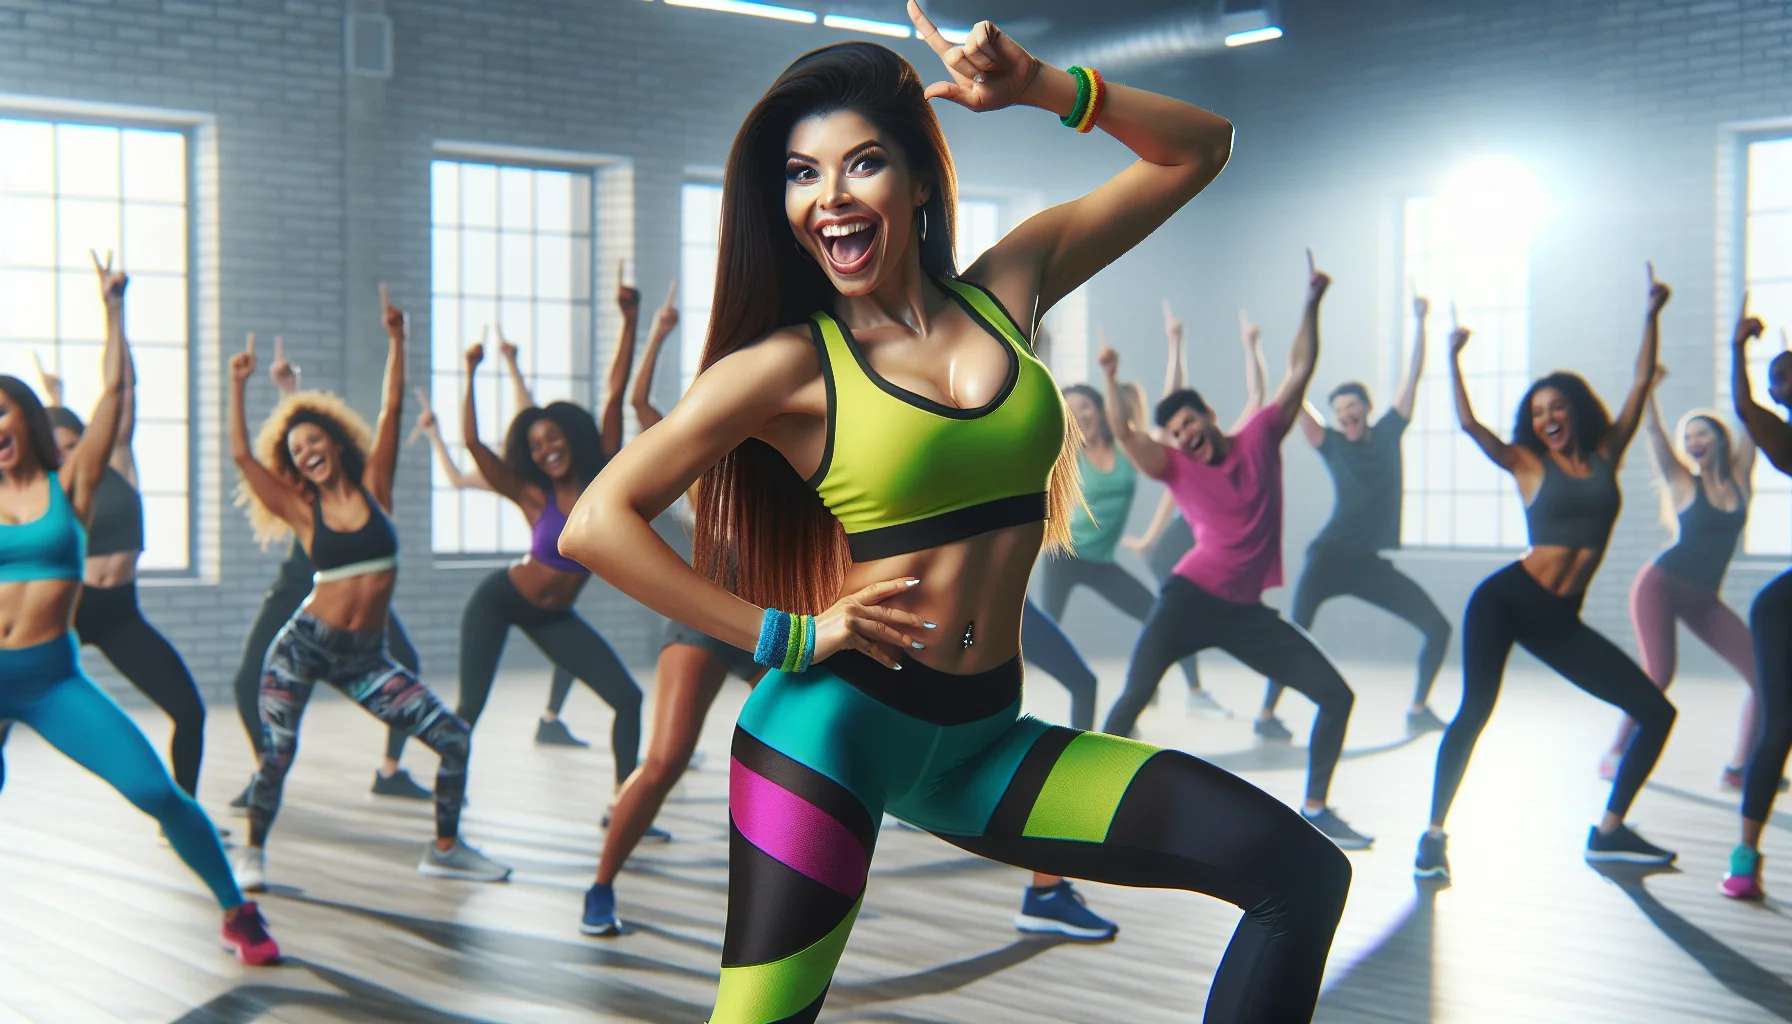 Generate a realistic image showcasing a joyful Hispanic woman instructing a Zumba class, inviting people to work out with her. The woman has long, dark hair tied up in a ponytail, and she wears bright fitness attire. She stands on the stage, demonstrating a hilarious, exaggerated Zumba move. The background is filled with people of various descents and both genders, laughing and attempting to imitate her move, capturing a fun and lighthearted exercise atmosphere.